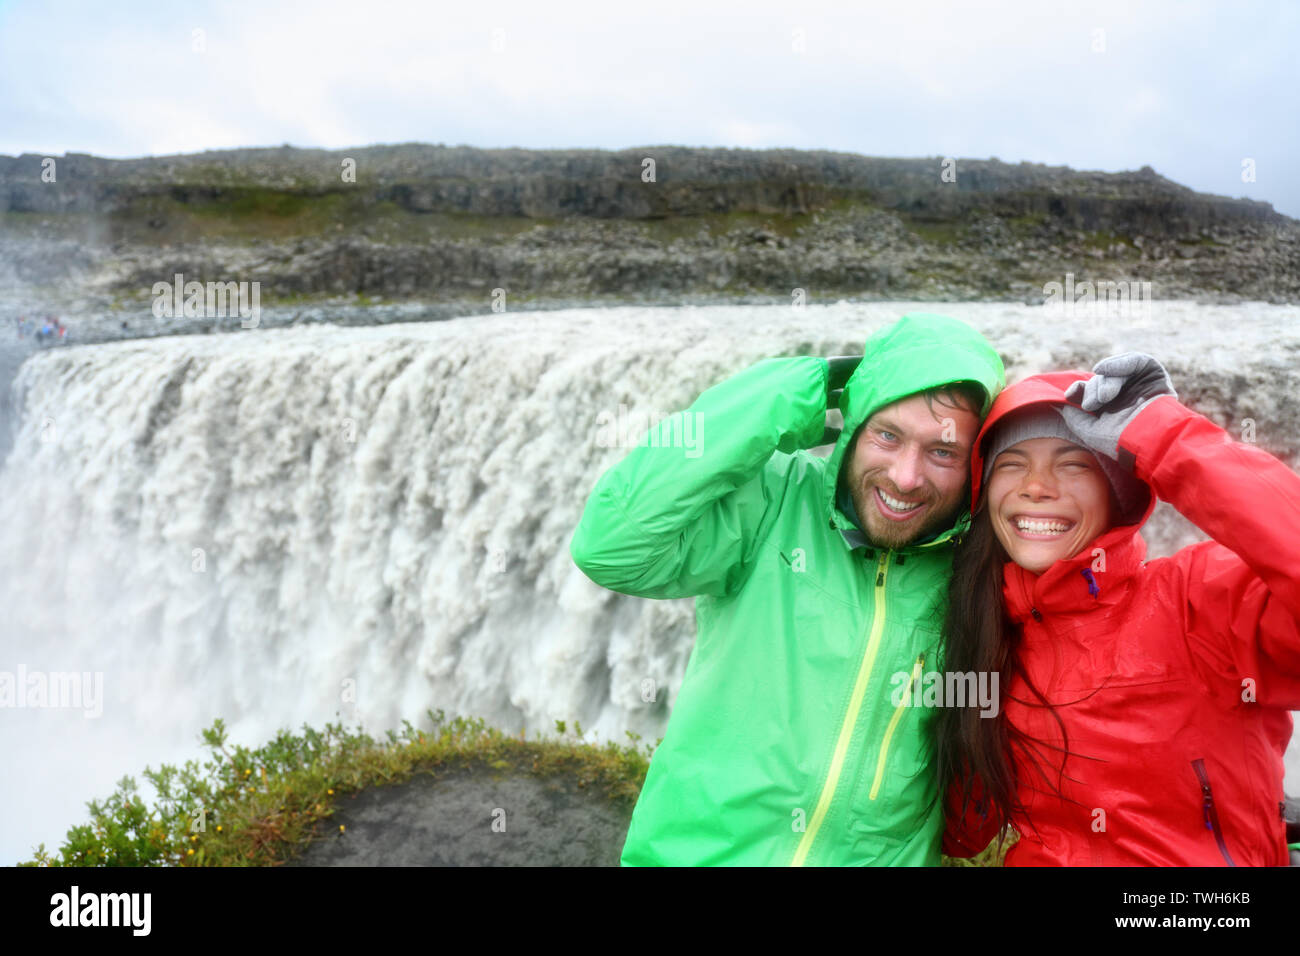 Travel couple fun in raincoats by Dettifoss waterfall on Iceland. People visiting famous tourist attractions and landmarks on Diamond Circle. Stock Photo